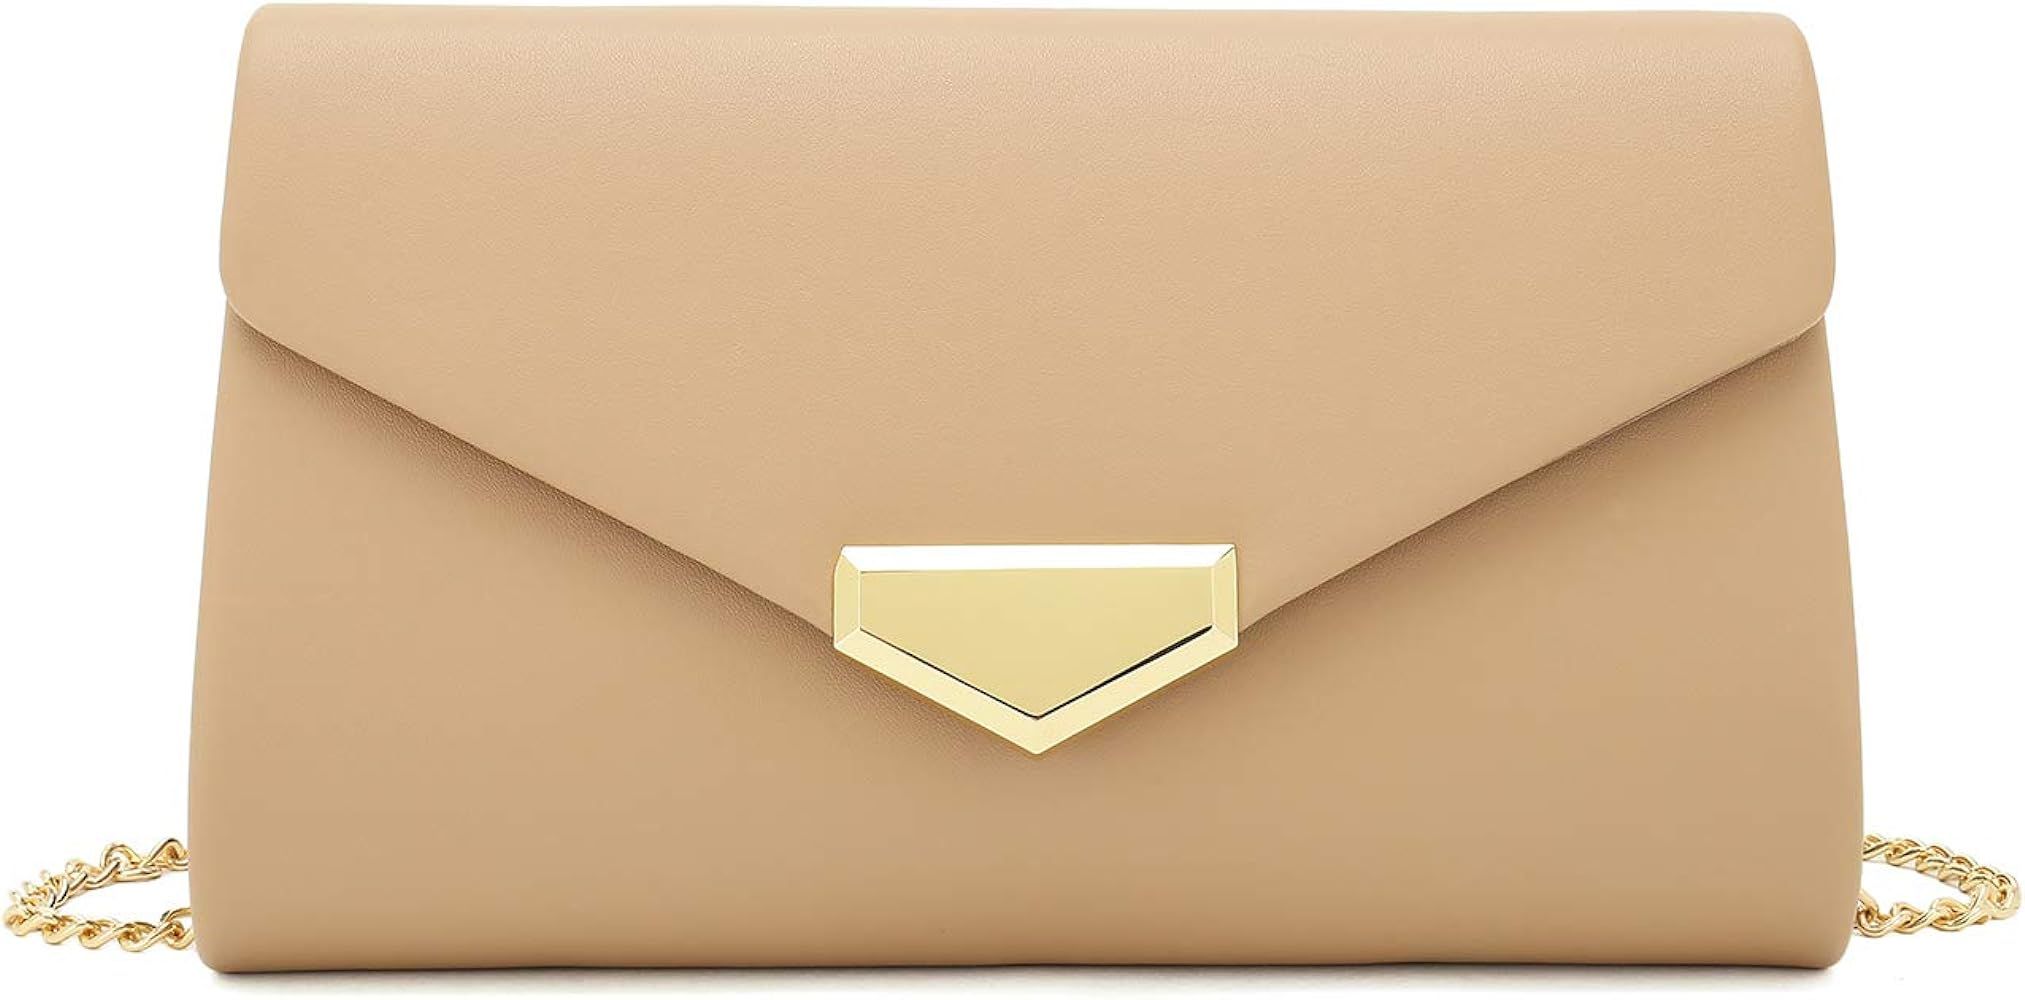 Charming Tailor PU Clutch Purse for Women Evening Bag Chic Clutch Handbag for Special-occasion | Amazon (US)